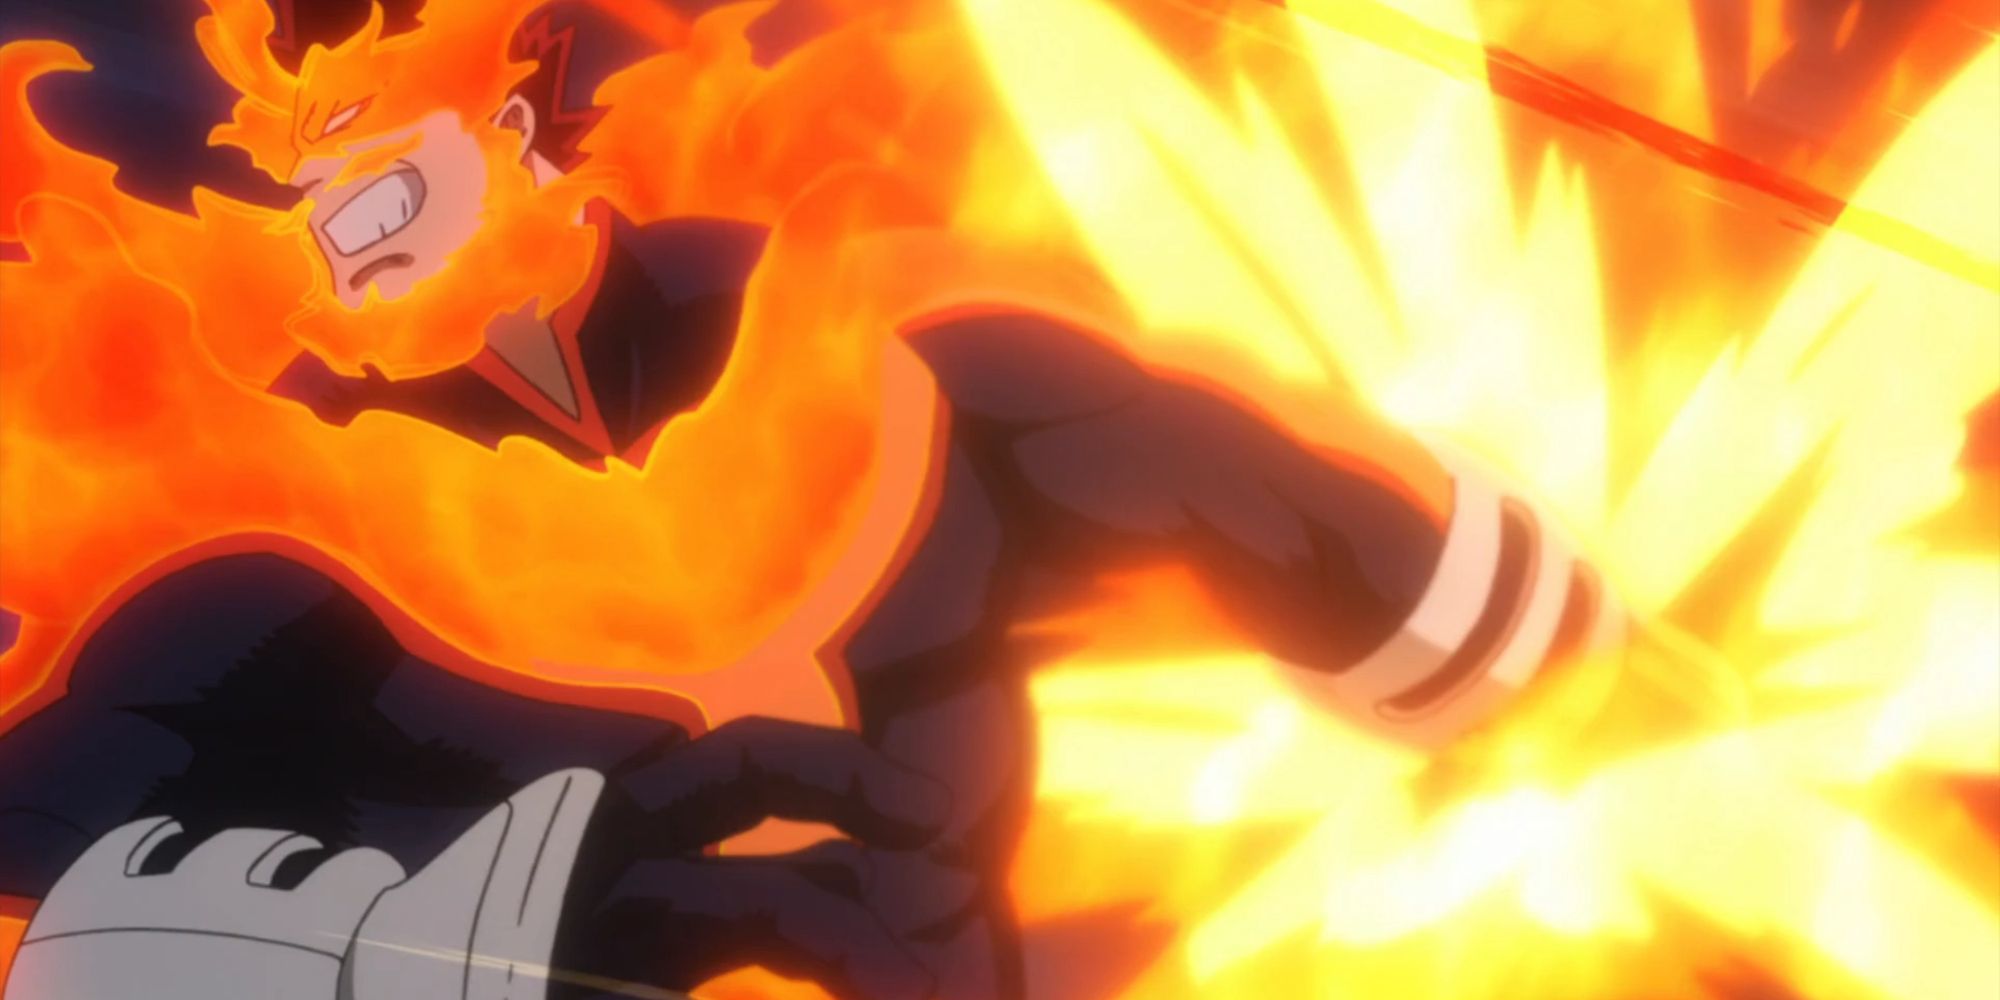 endeavor's Ignited attack